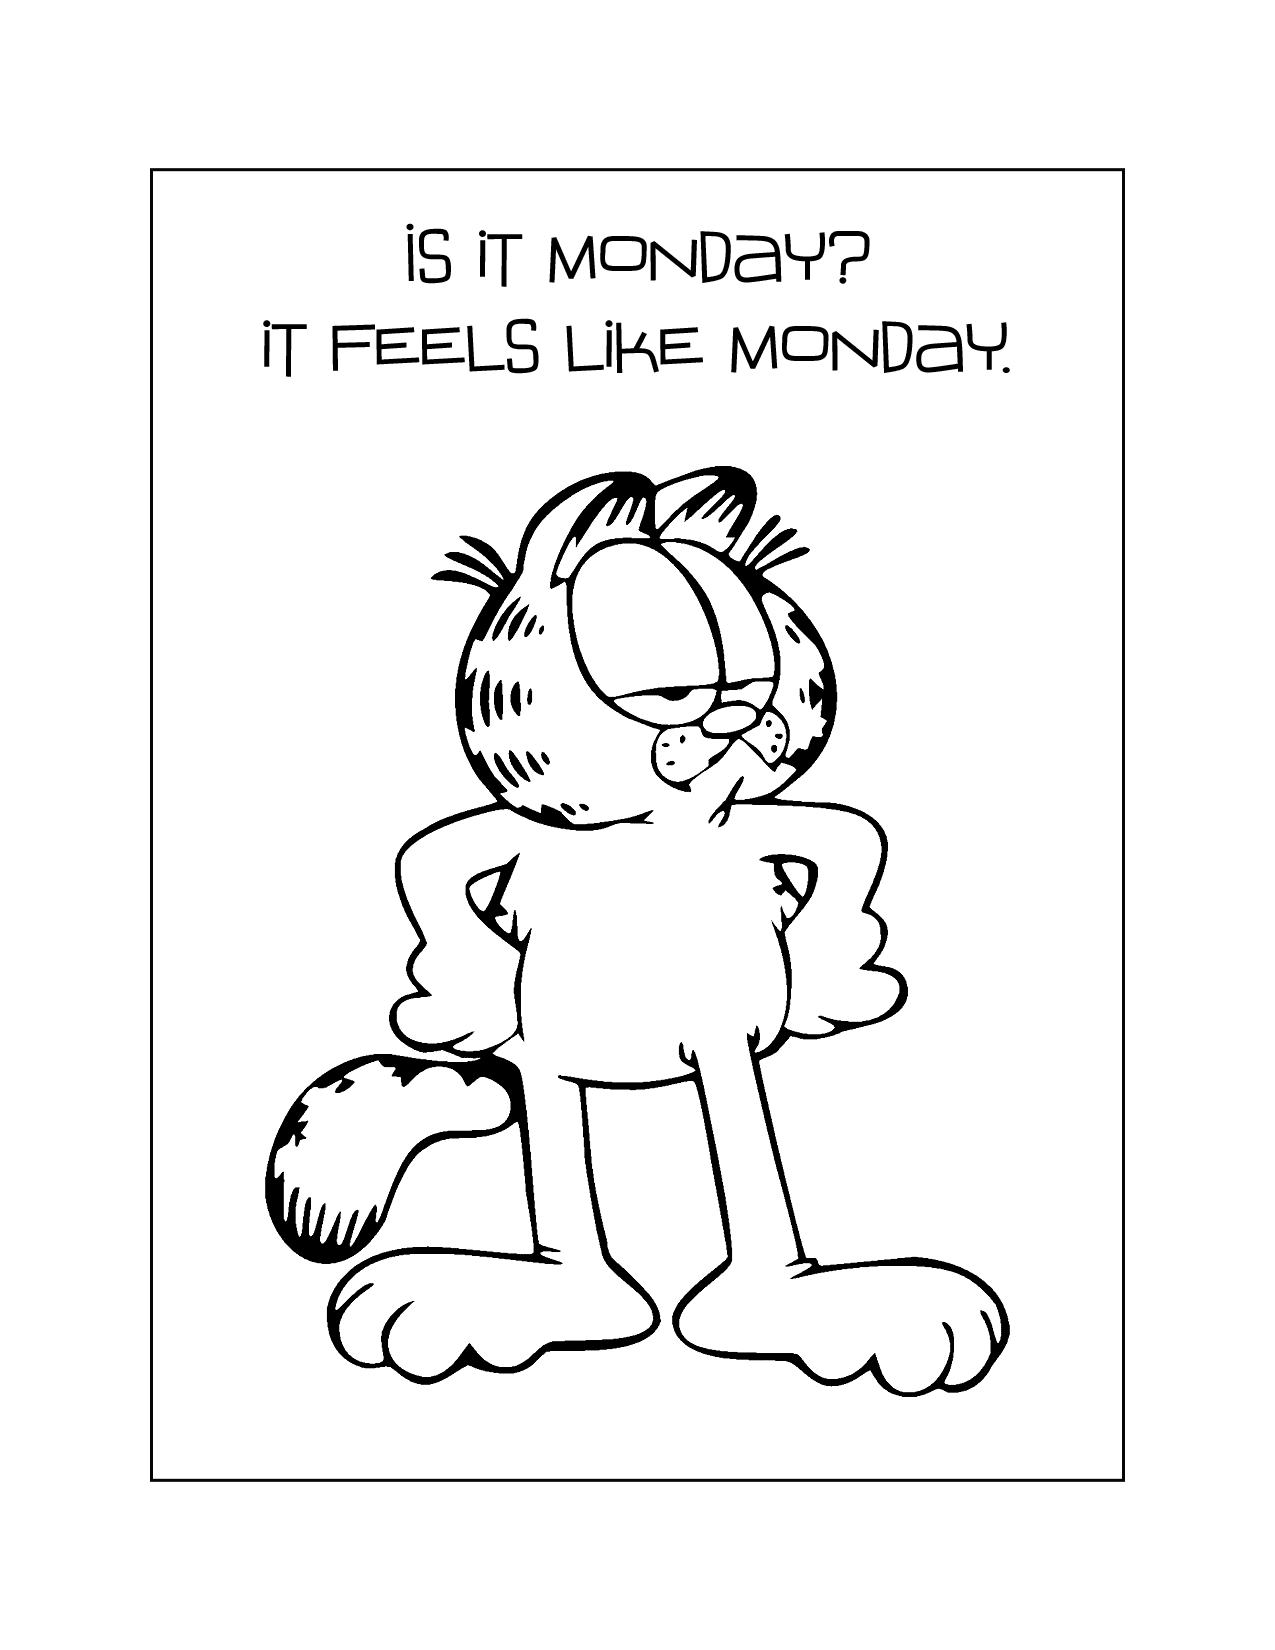 Garfield Monday Coloring Page